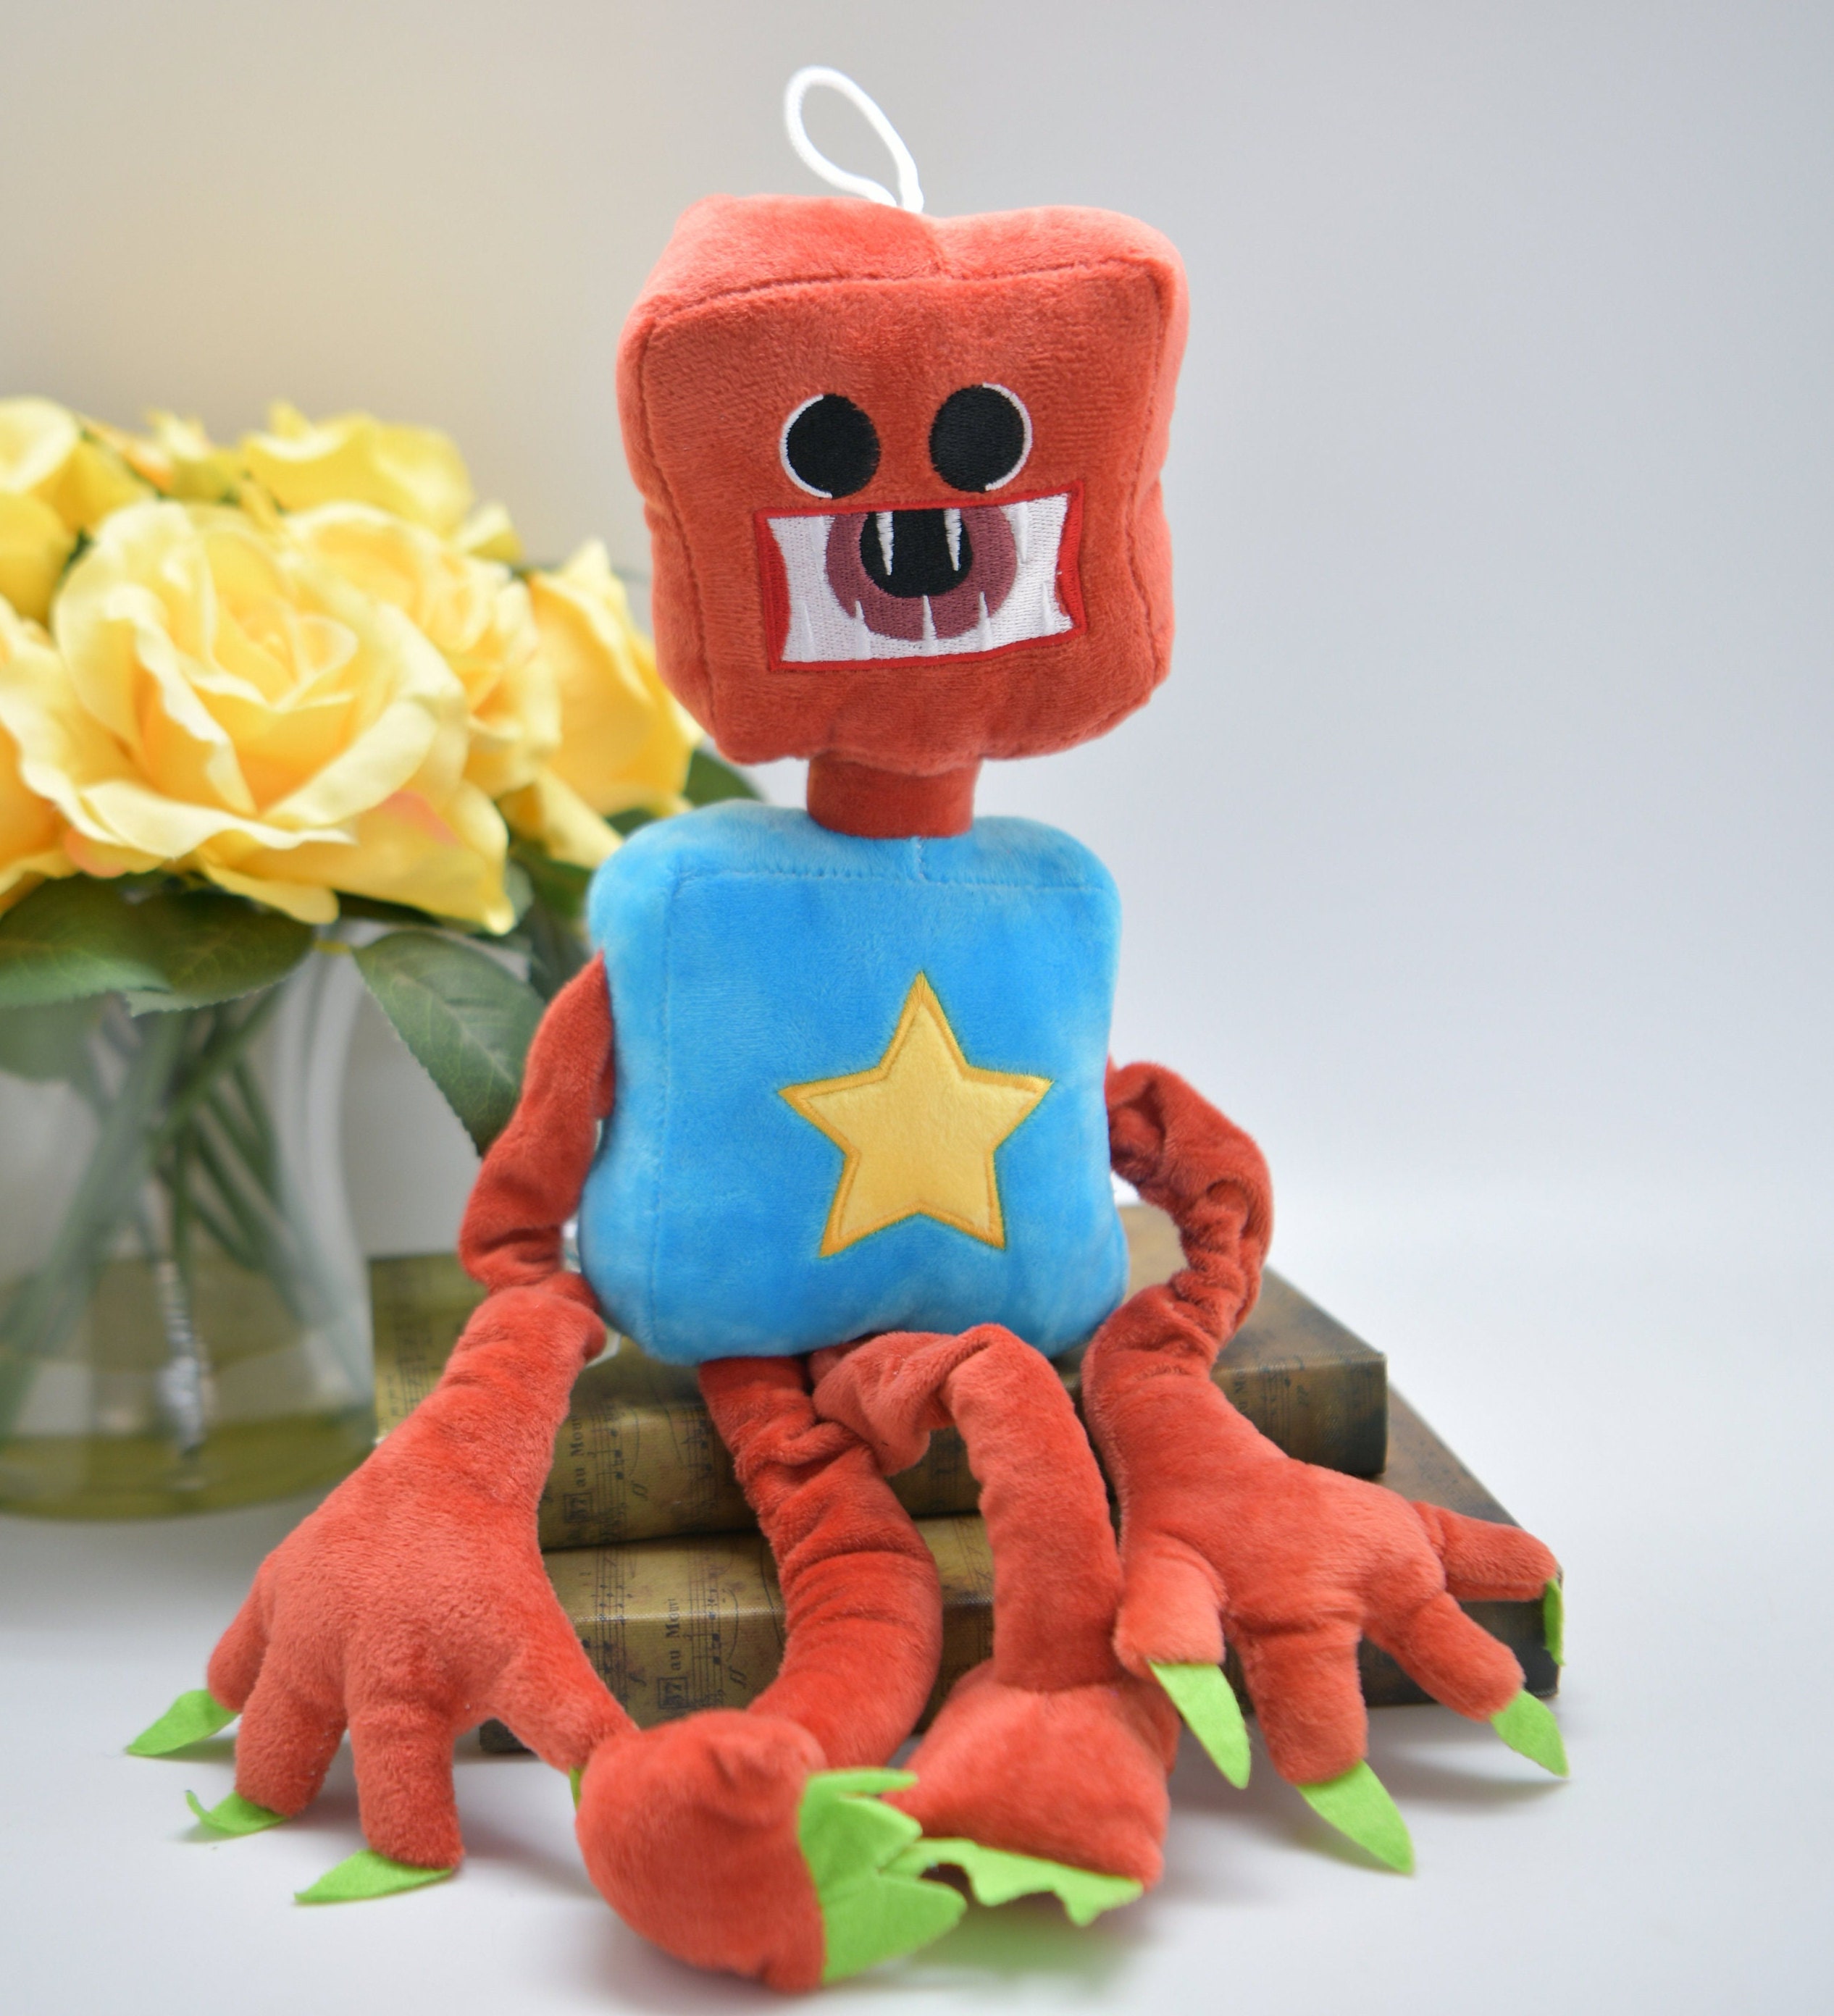 Dookilive Poppy Playtime Plush Toy Poppy Doll Scare Box Gift for Friends